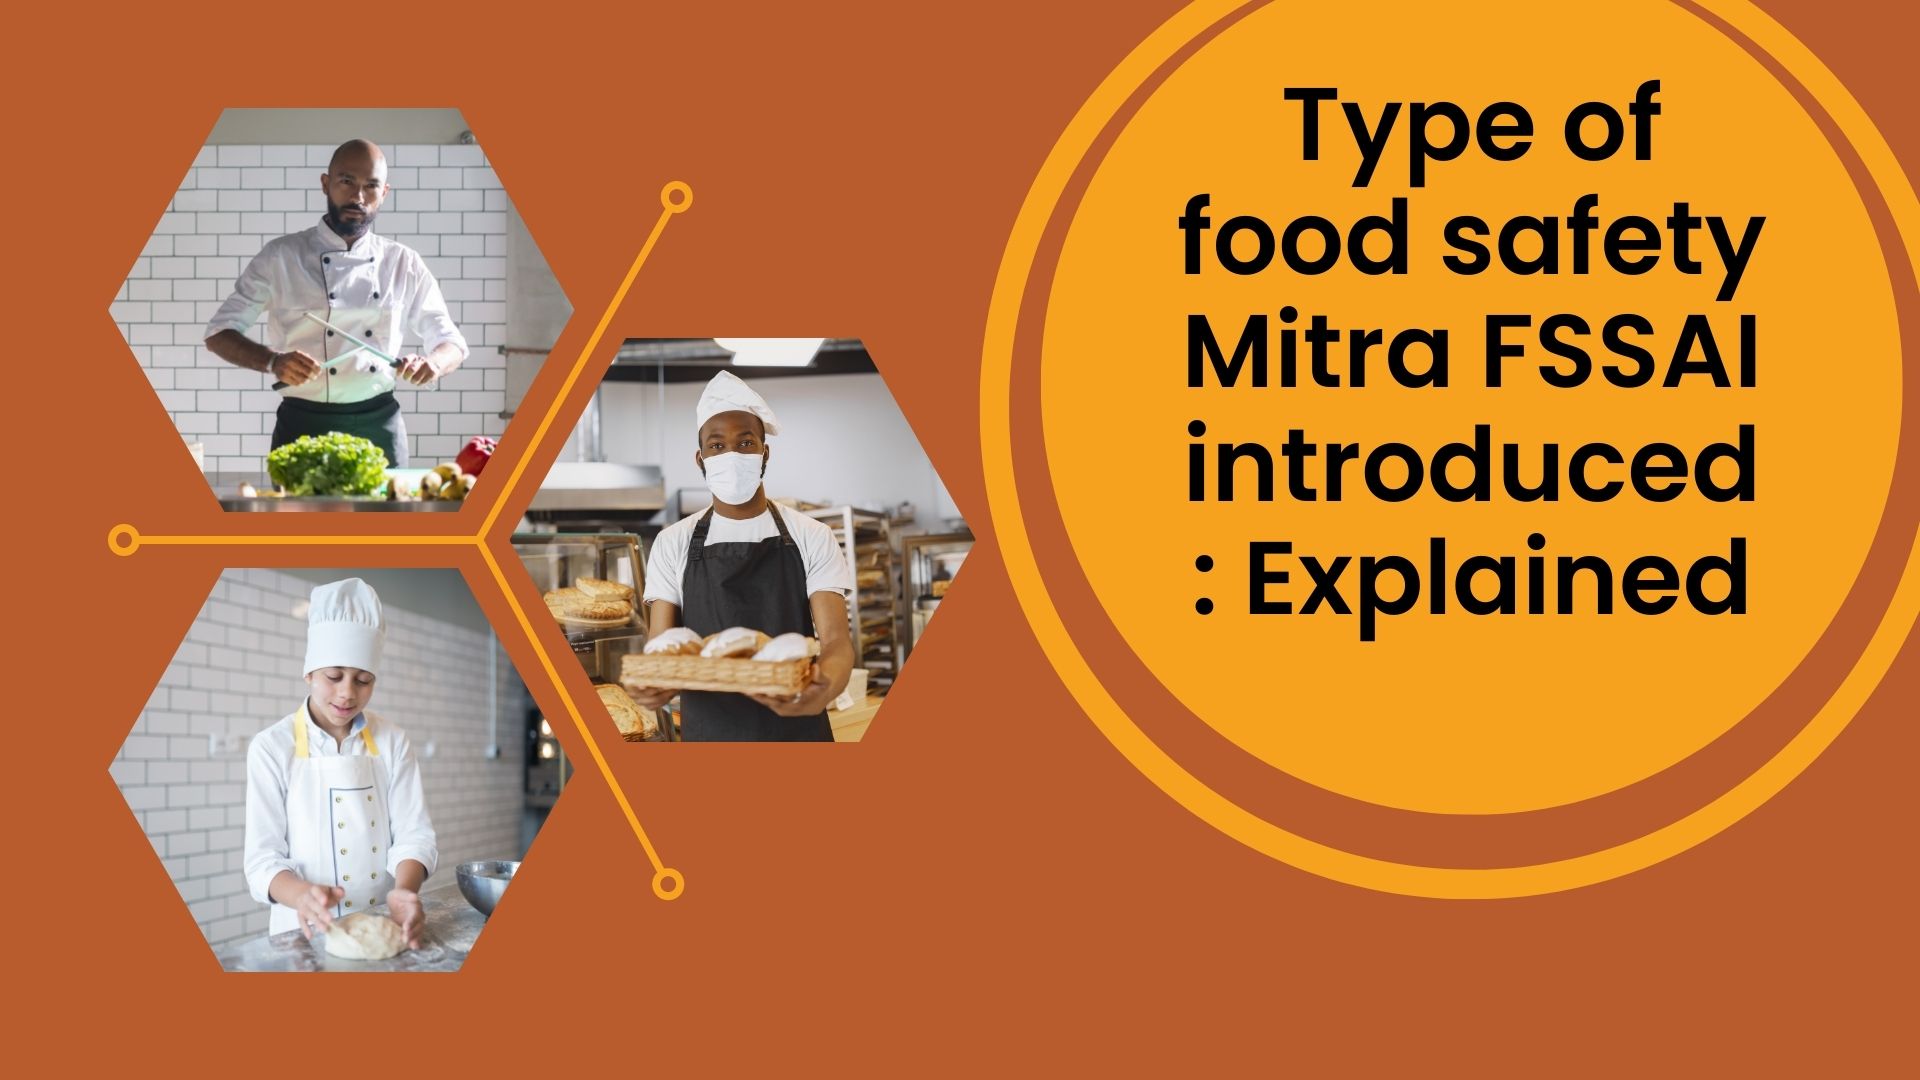 Type of food safety Mitra FSSAI introduced Explained